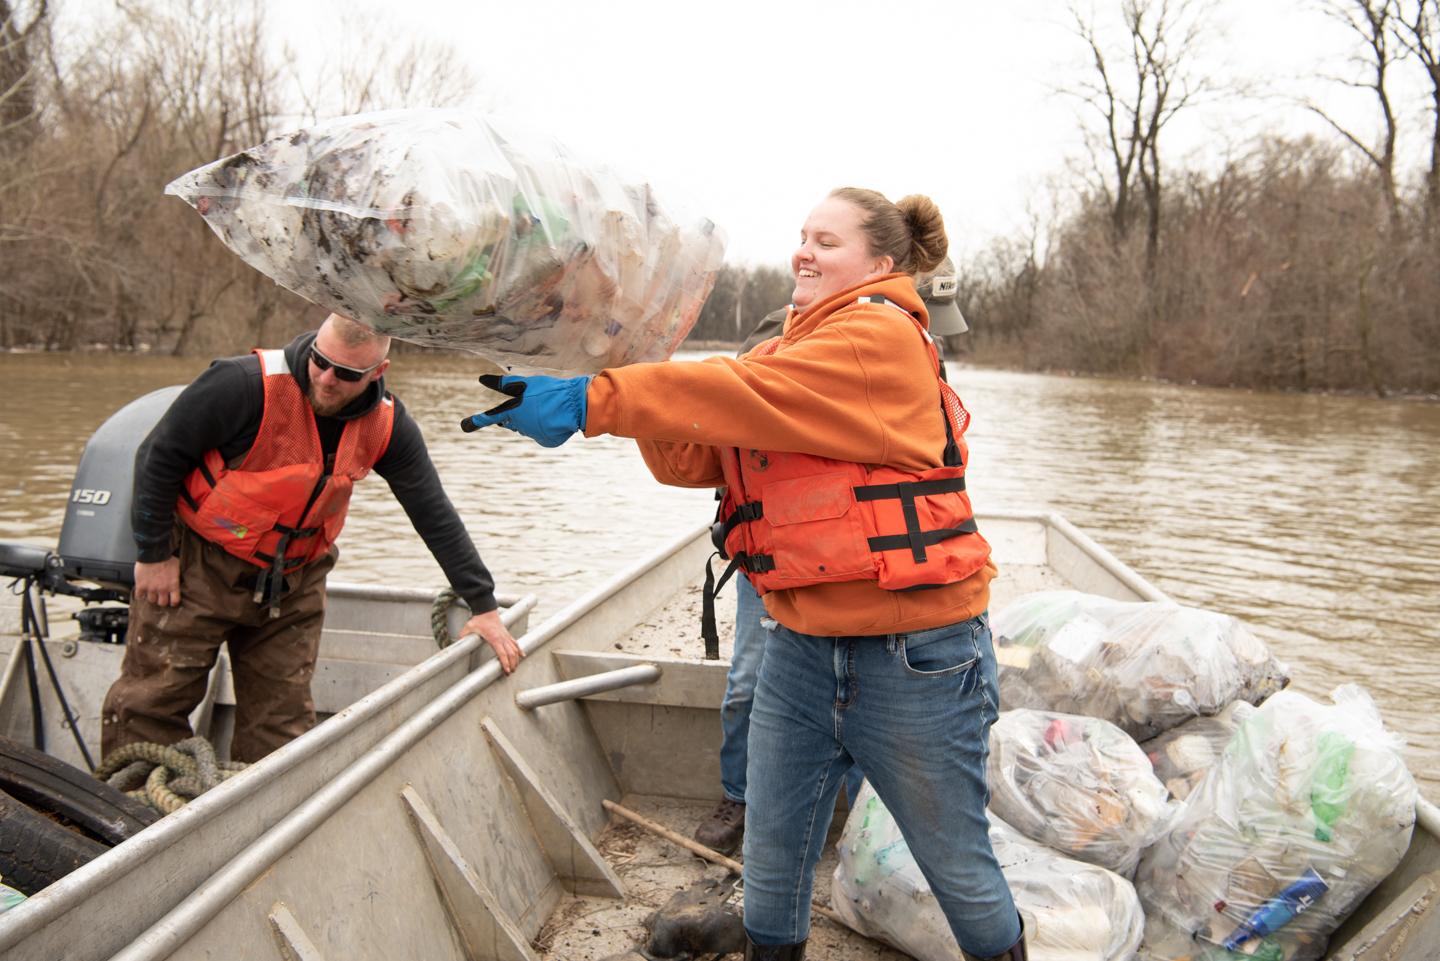 Junior social work major Sarah Kraft tosses a bag or recyclables onto the garbage boat.